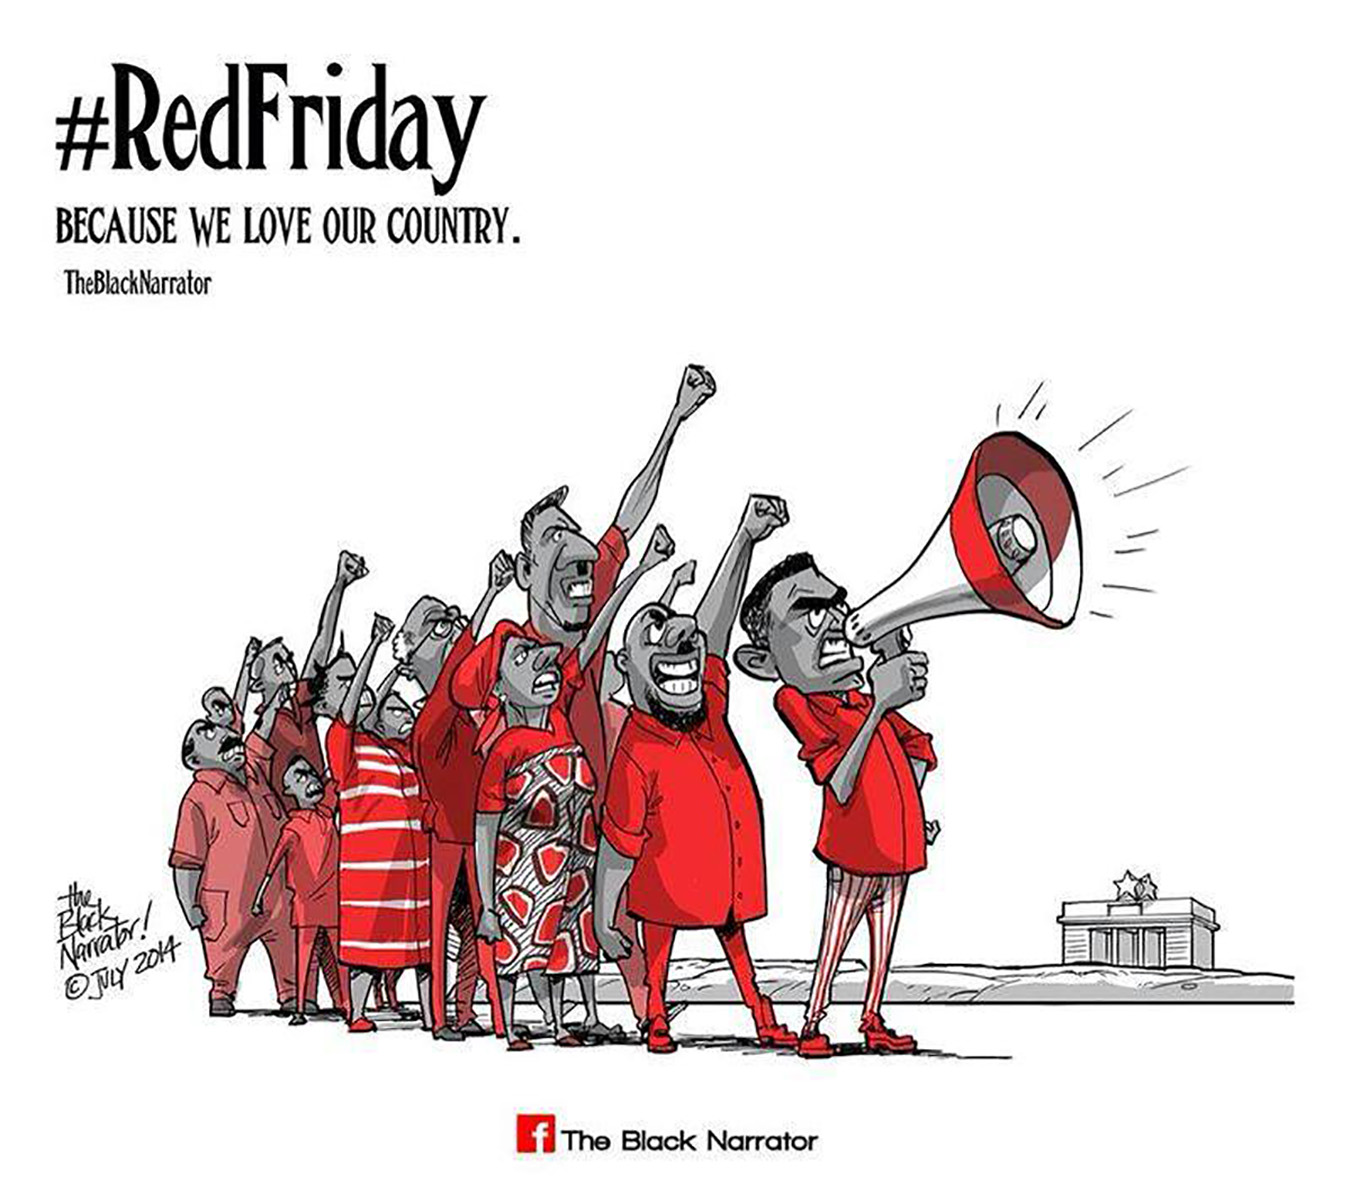 “#RedFriday. Because We Love Our Country.” Image by The Black Narrator.